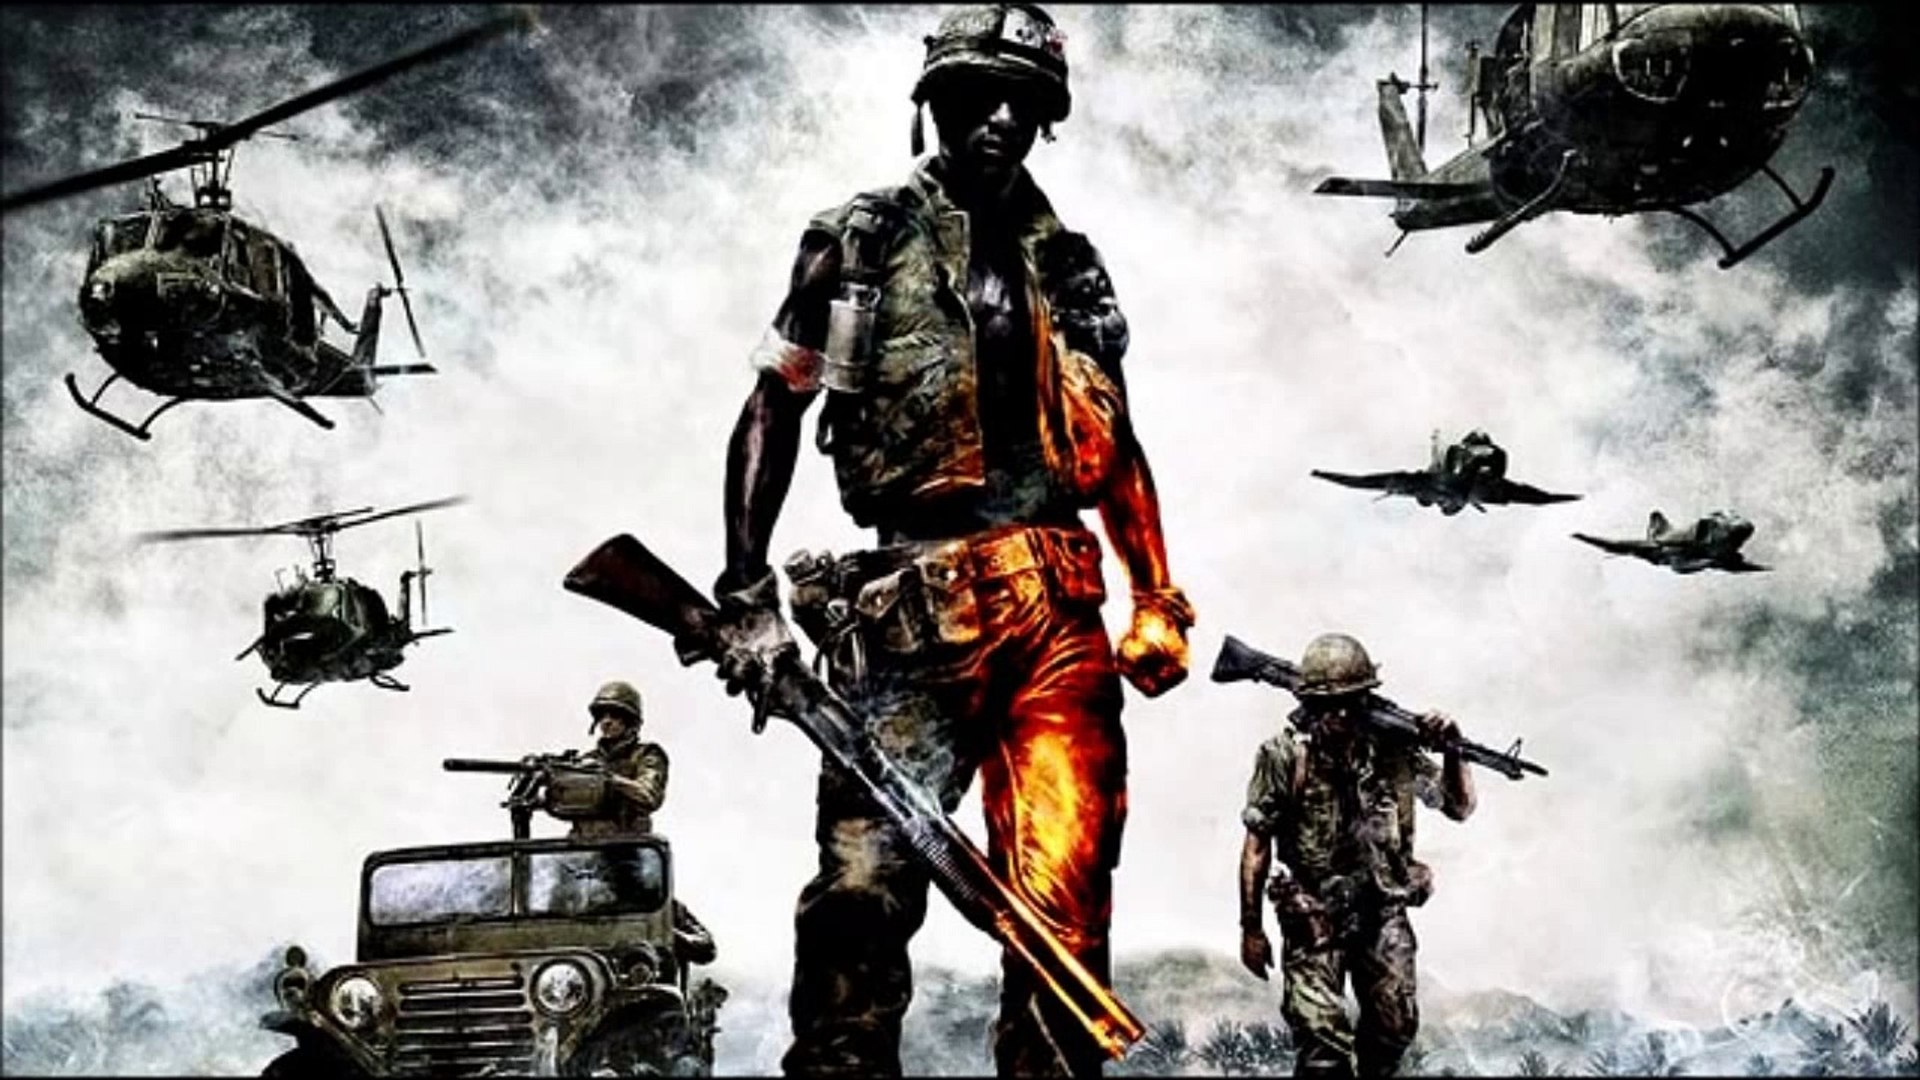 ⁣Creedence Clearwater Revival - Fortunate Son (Battlefield Bad Company 2 Vietnam - Soundtrack) [HD]